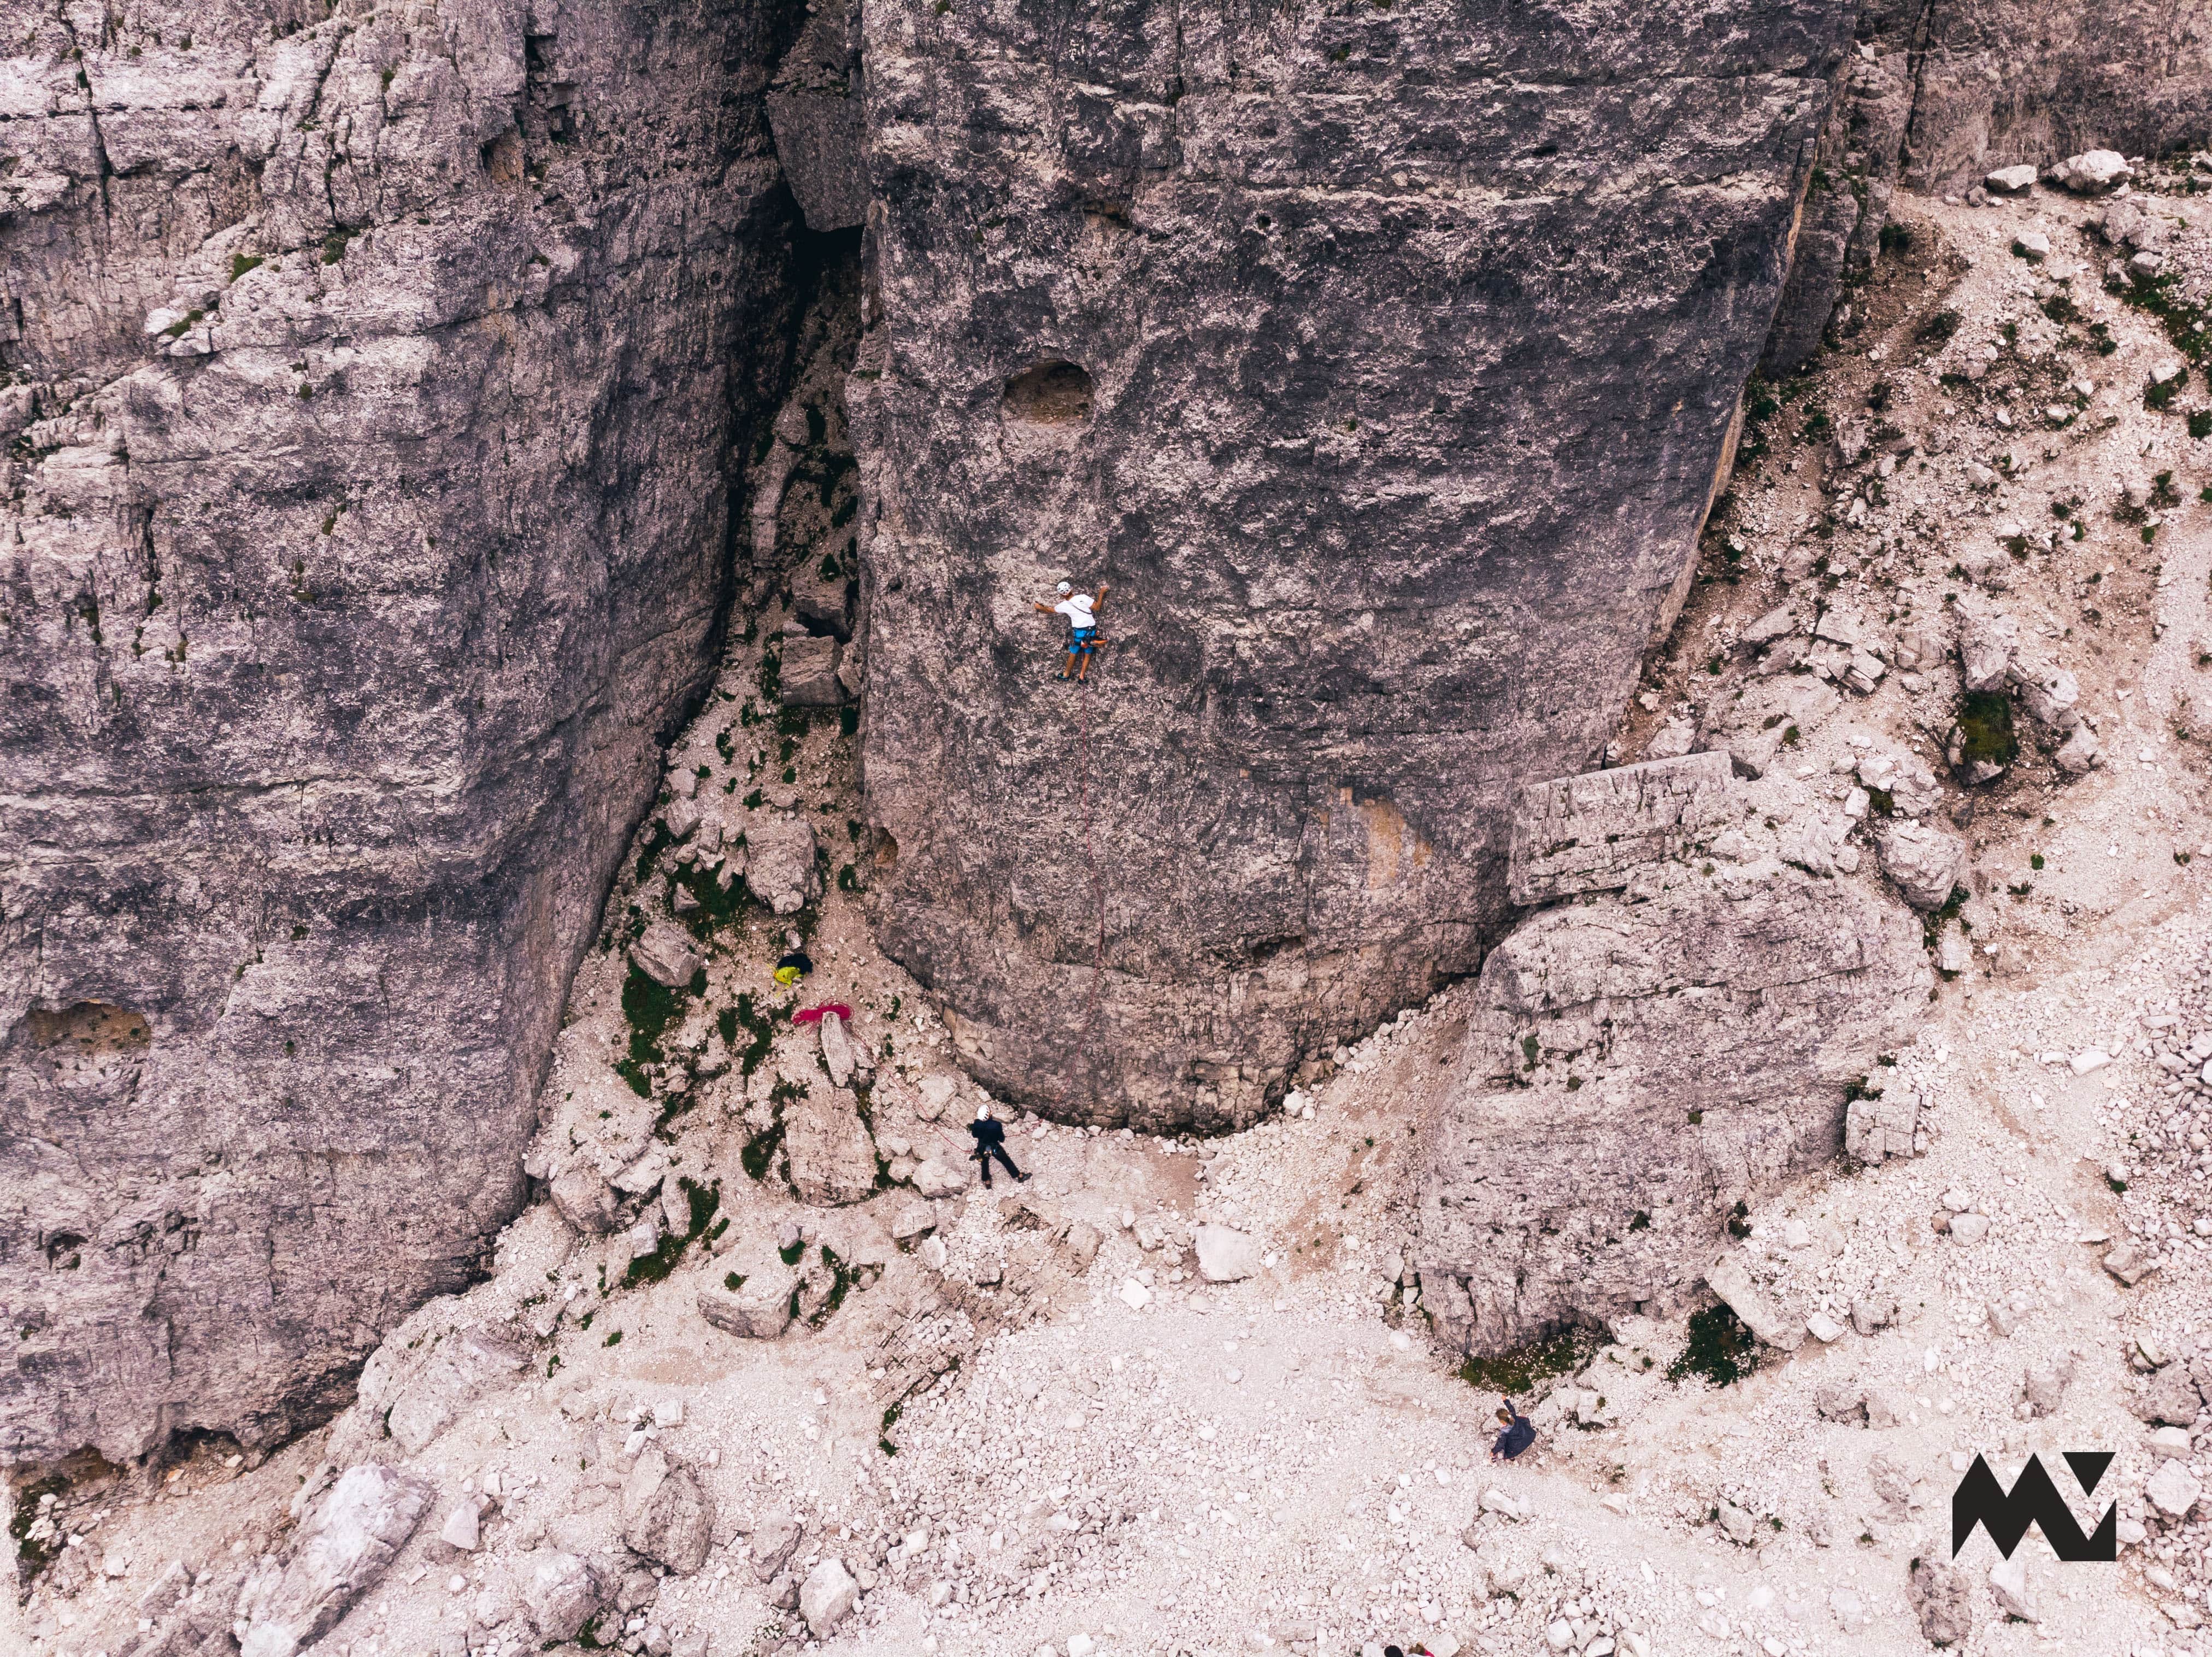 A person sport climbing in the Dolomites with another person belaying them